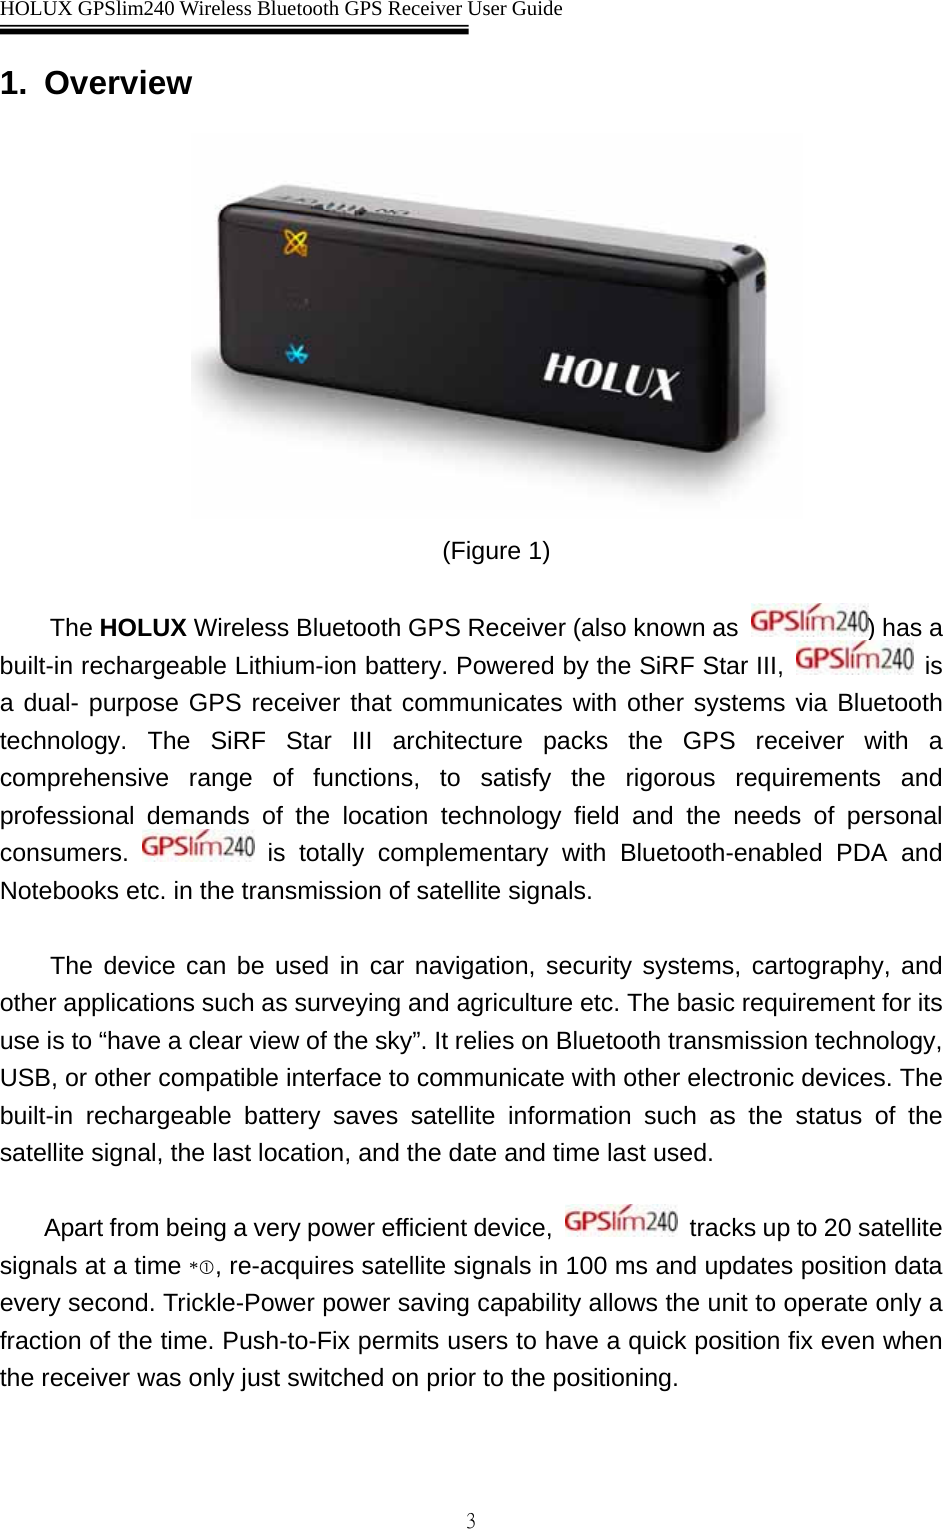  HOLUX GPSlim240 Wireless Bluetooth GPS Receiver User Guide   31. Overview  (Figure 1)  The HOLUX Wireless Bluetooth GPS Receiver (also known as  ) has a built-in rechargeable Lithium-ion battery. Powered by the SiRF Star III,   is a dual- purpose GPS receiver that communicates with other systems via Bluetooth technology. The SiRF Star III architecture packs the GPS receiver with a comprehensive range of functions, to satisfy the rigorous requirements and professional demands of the location technology field and the needs of personal consumers.   is totally complementary with Bluetooth-enabled PDA and Notebooks etc. in the transmission of satellite signals.    The device can be used in car navigation, security systems, cartography, and other applications such as surveying and agriculture etc. The basic requirement for its use is to “have a clear view of the sky”. It relies on Bluetooth transmission technology, USB, or other compatible interface to communicate with other electronic devices. The built-in rechargeable battery saves satellite information such as the status of the satellite signal, the last location, and the date and time last used.    Apart from being a very power efficient device,   tracks up to 20 satellite signals at a time *c, re-acquires satellite signals in 100 ms and updates position data every second. Trickle-Power power saving capability allows the unit to operate only a fraction of the time. Push-to-Fix permits users to have a quick position fix even when the receiver was only just switched on prior to the positioning. 